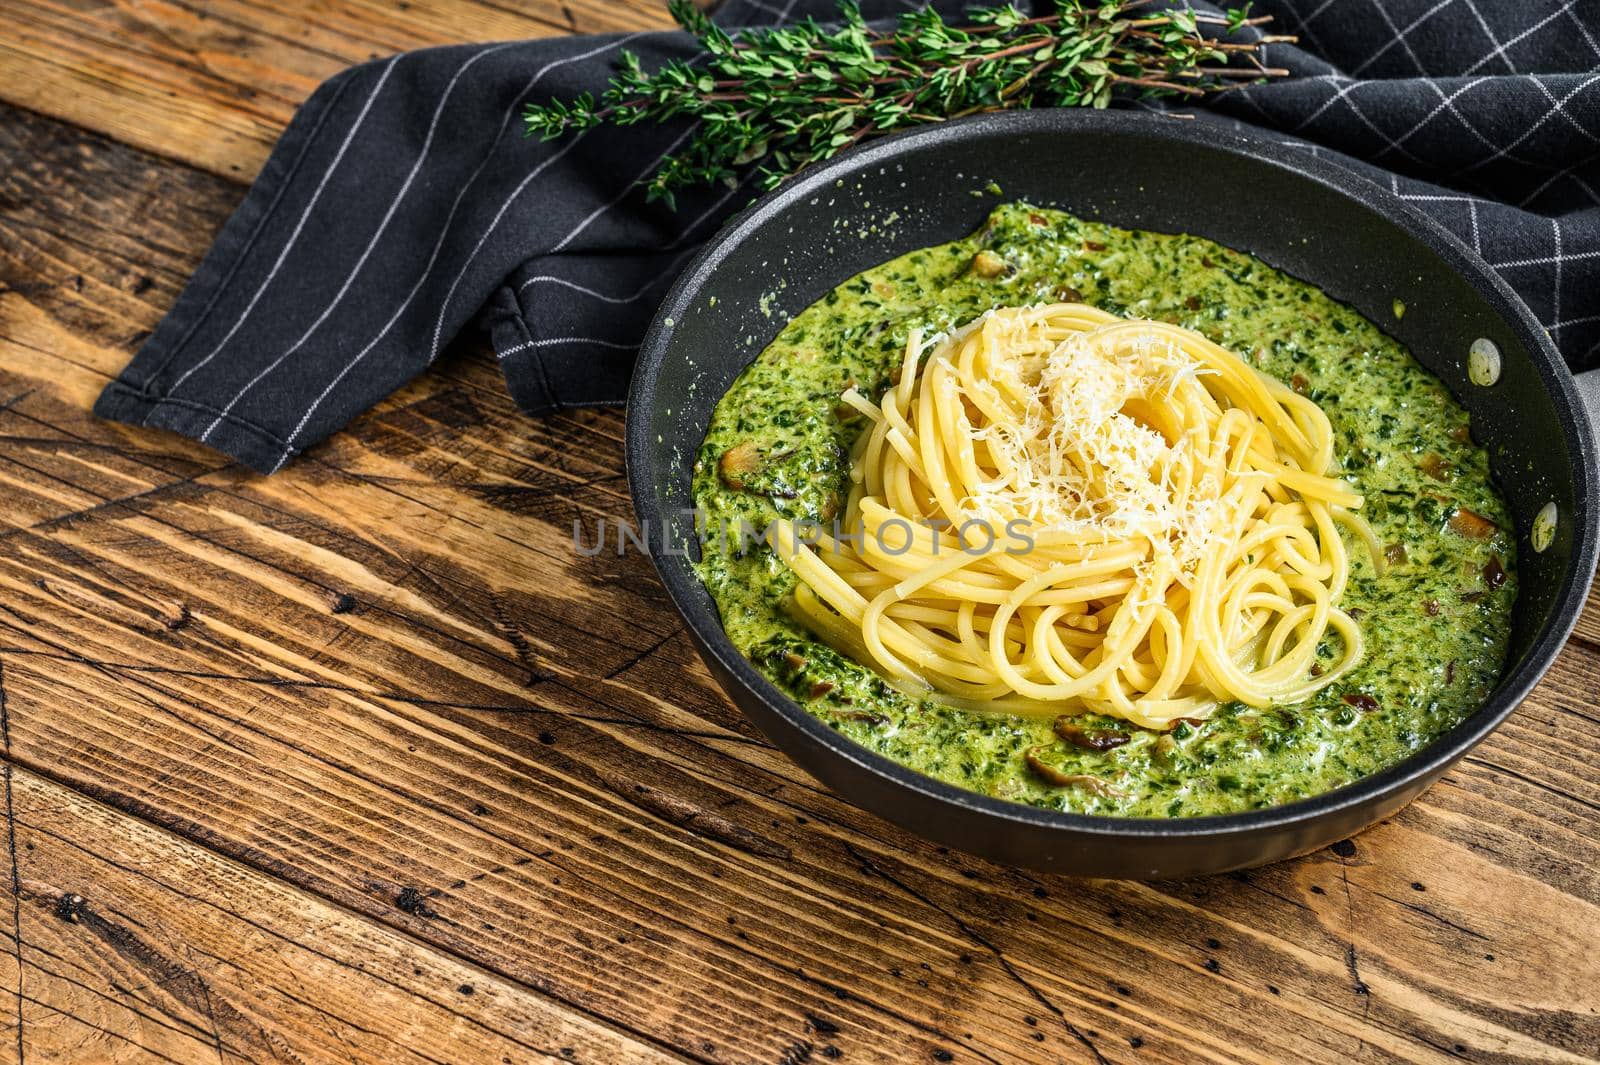 Pasta spaghetti with pesto sauce and fresh spinach and parmesan in a pan. Wooden background. Top view. Copy space.